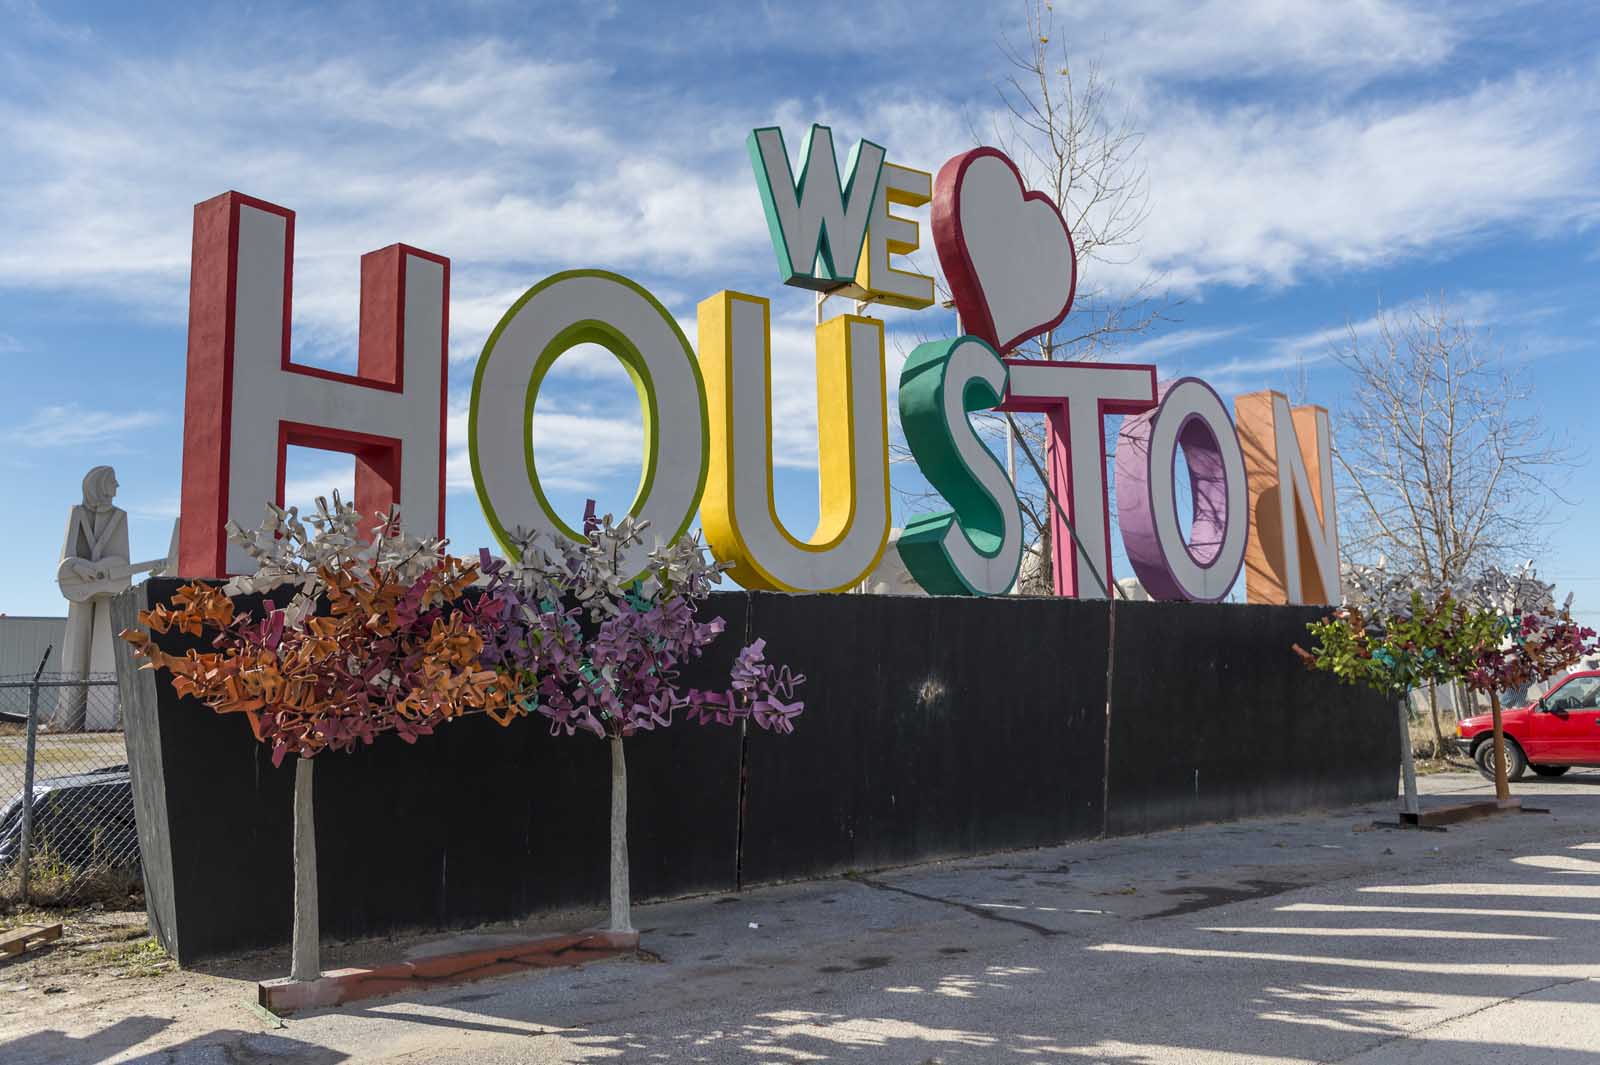 Top Things to do in Houston Texas